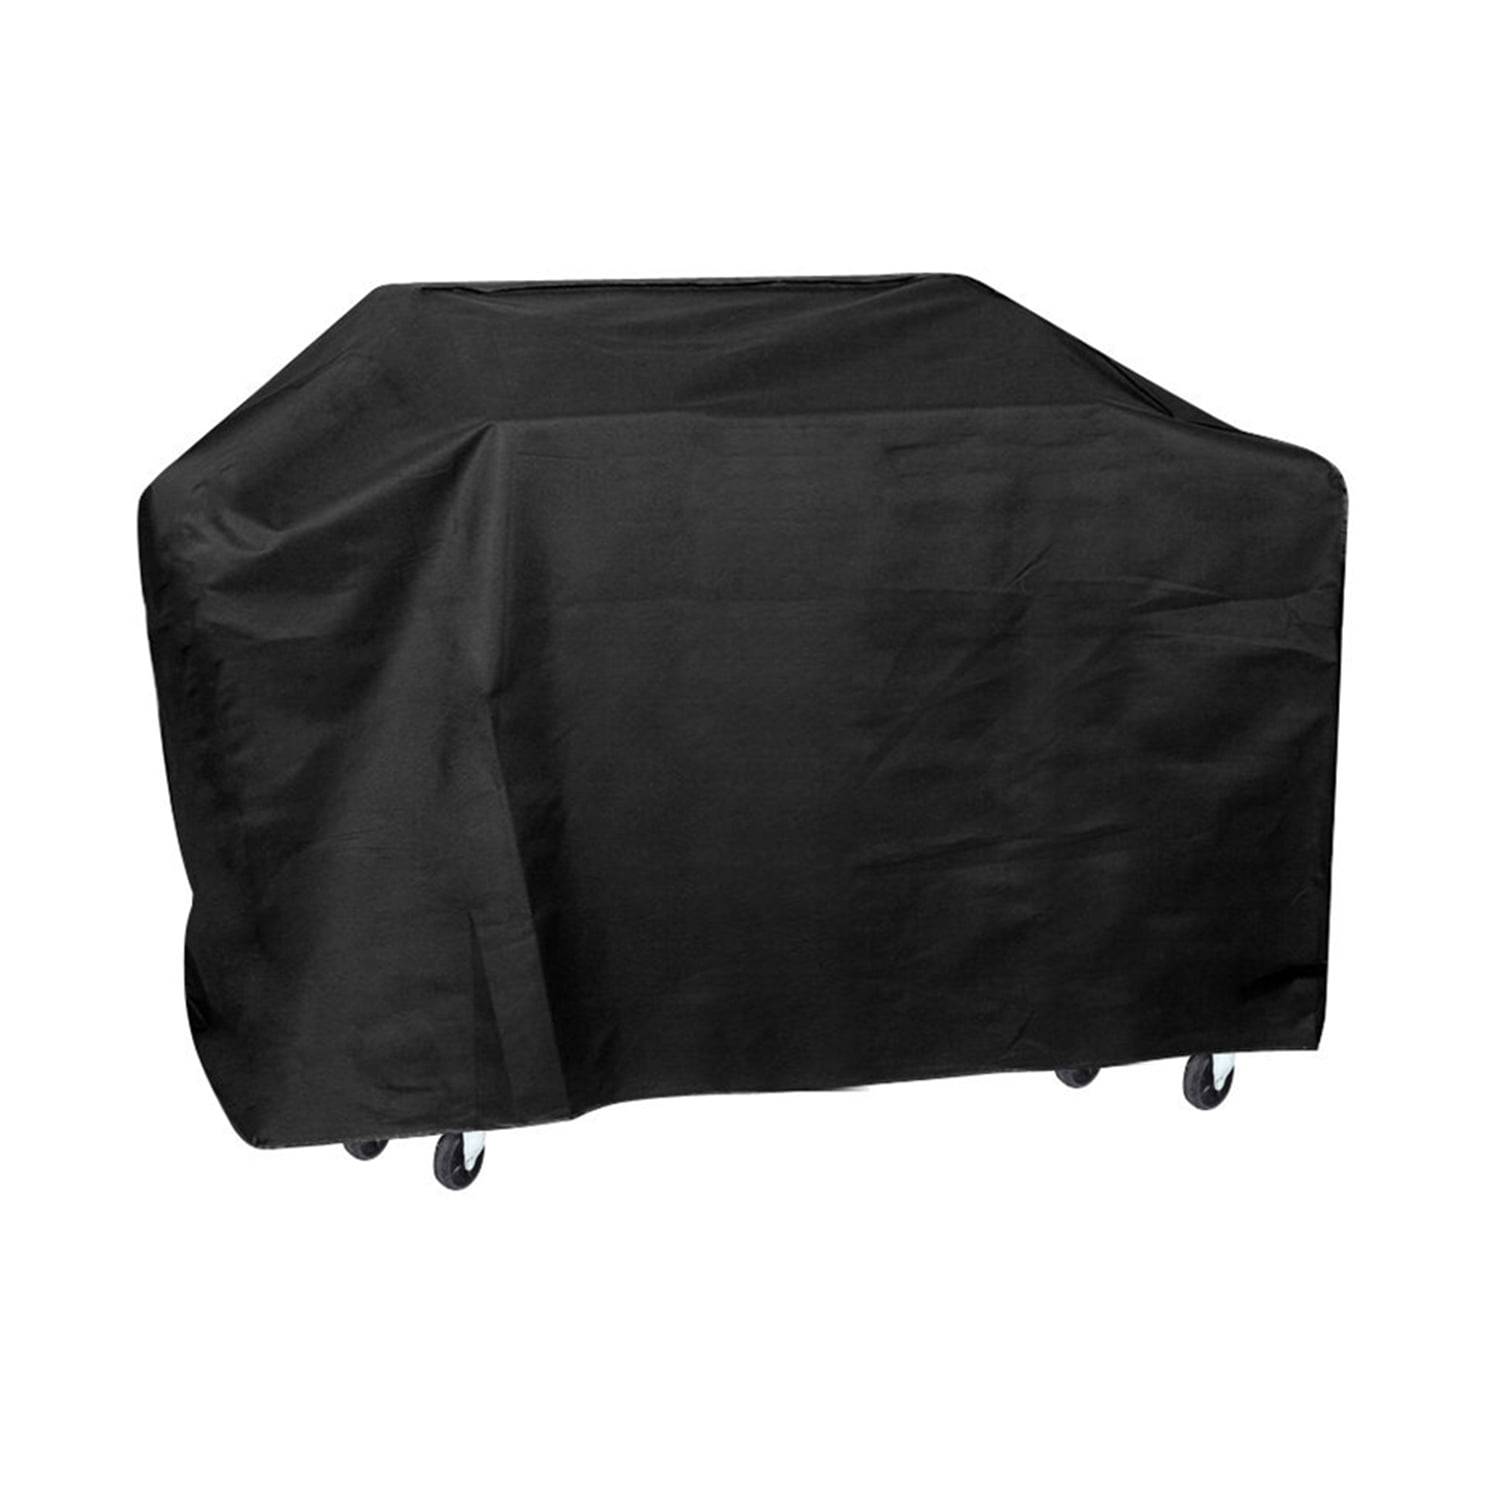 Weather-Resistant Gas Grill Cover for Outdoor Barbecue Charcoal Grill Iptienda BBQ Grill Cover Expert Grill Covers Heavy Duty Waterproof 55 inch